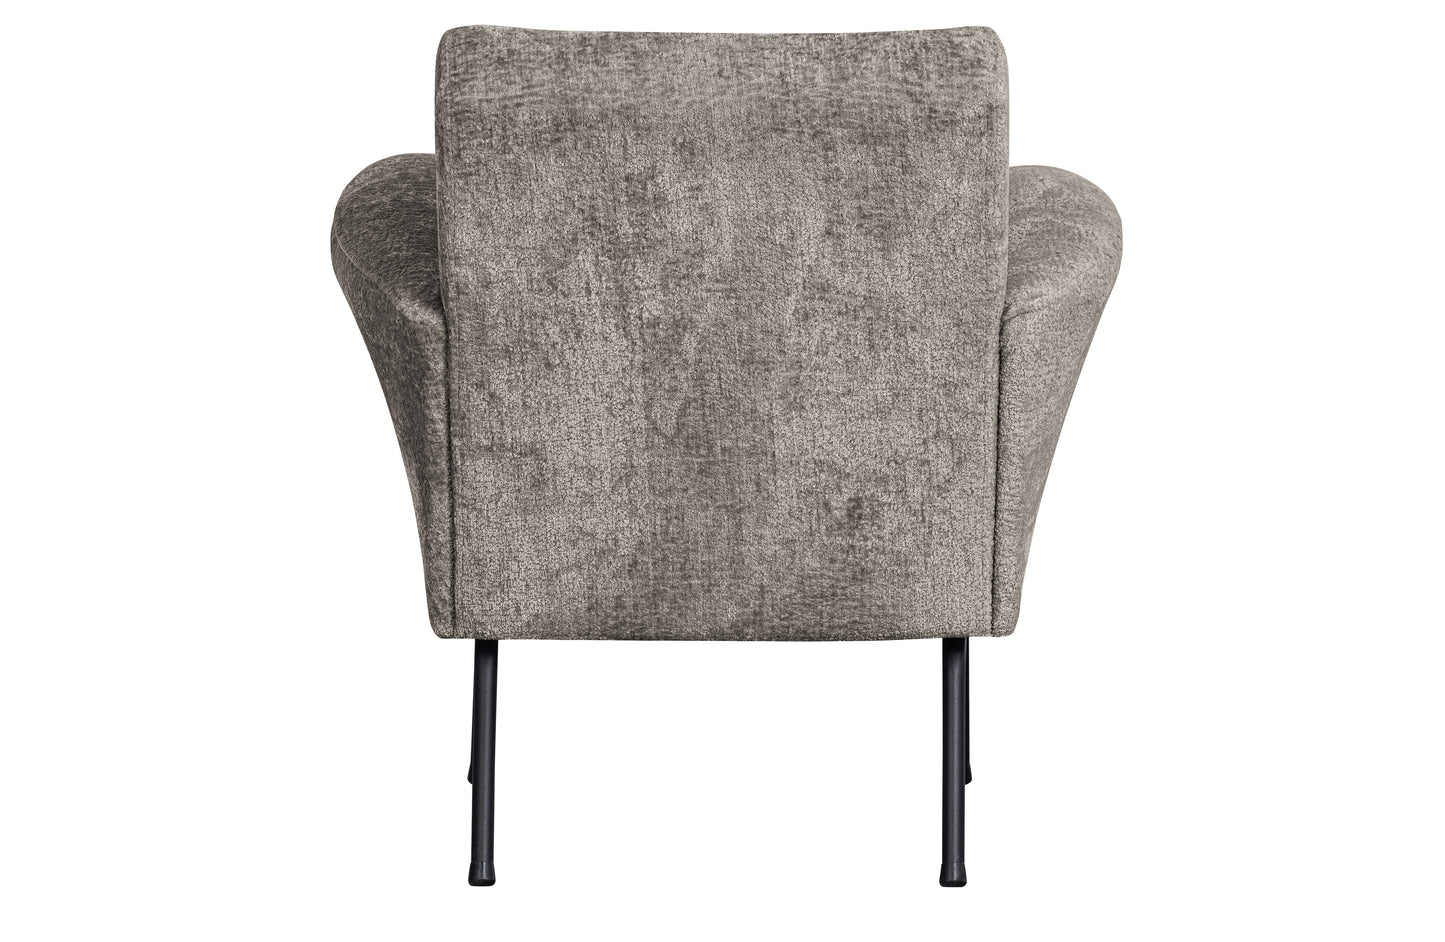 Muse Armchair Coarse Woven Fabric Taupe